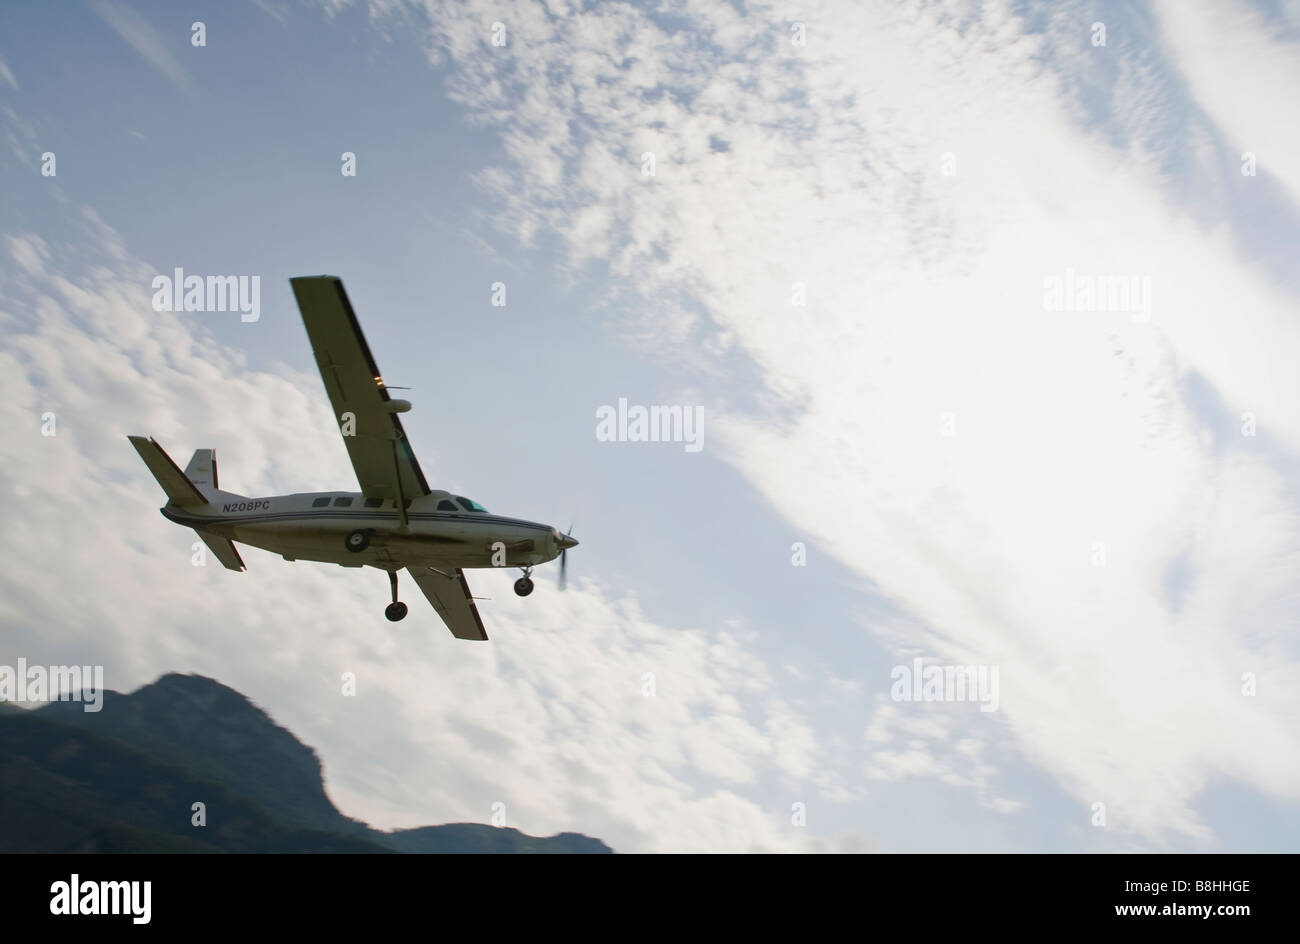 Cessna Caravan (C208) is doing a flyby close to the ground with mountains in the background as reverence. Stock Photo